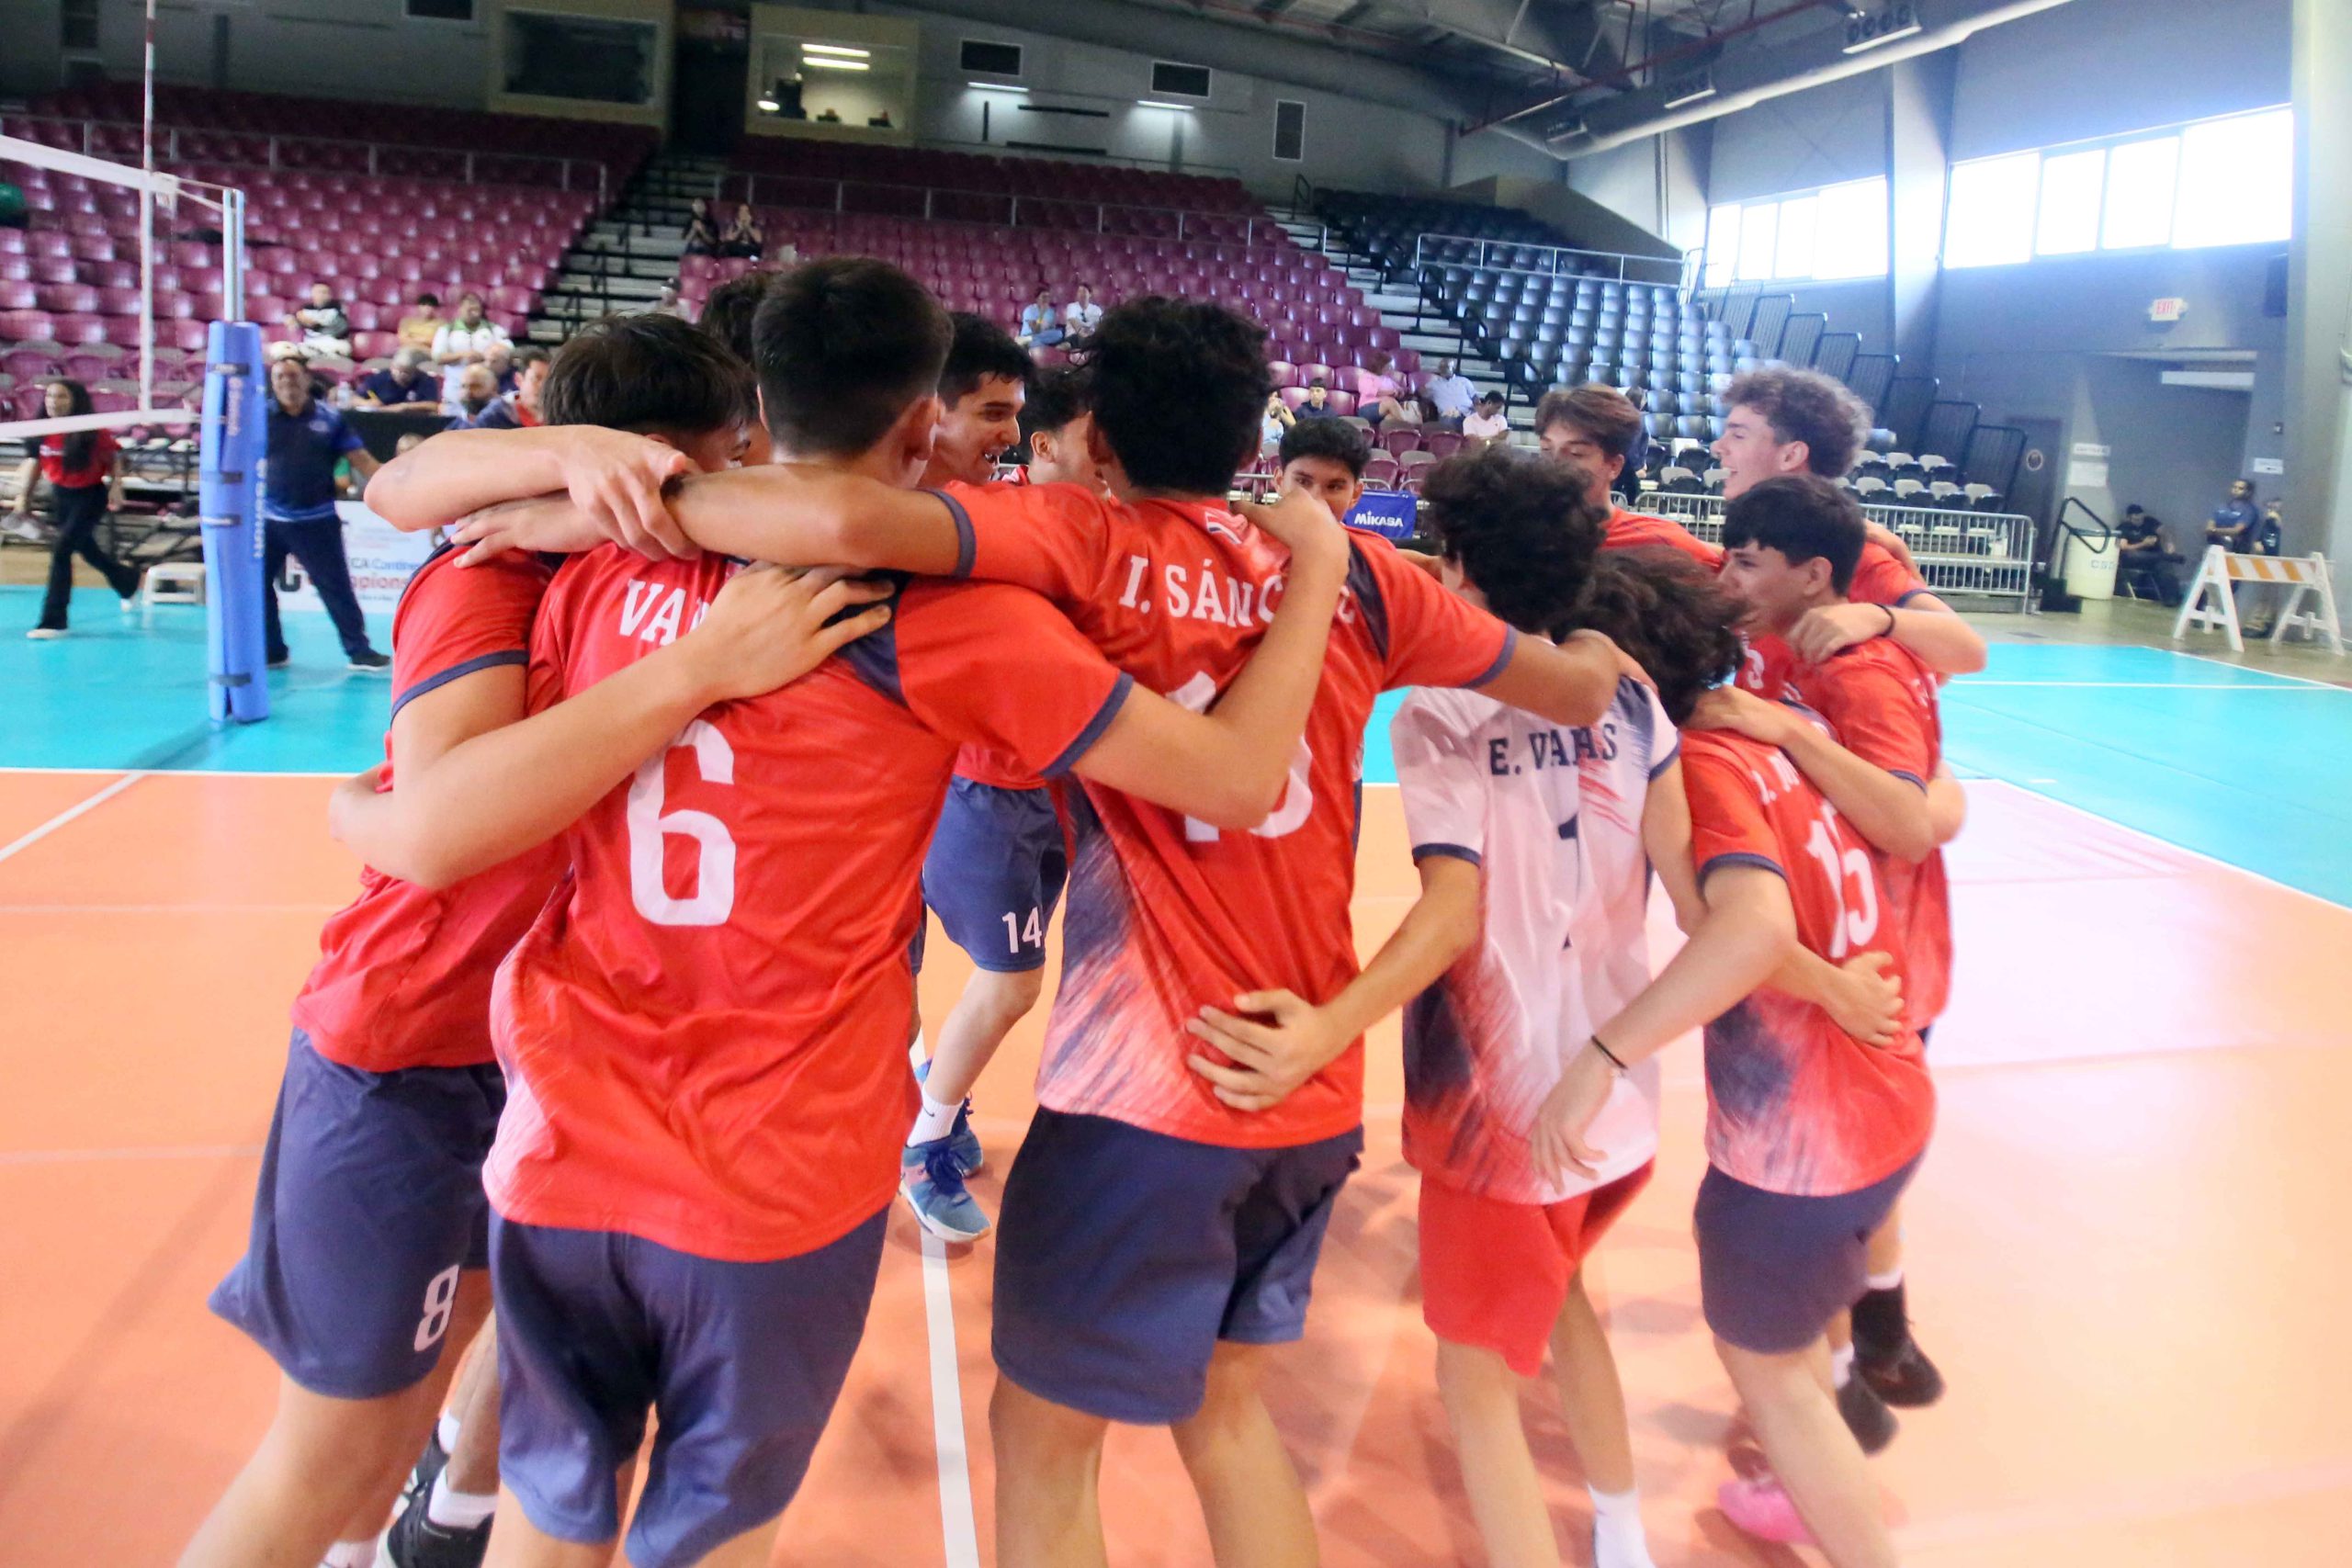 Costa Rica beat Guatemala in straight sets Victory Over Guatemala, will play for Fifth Place